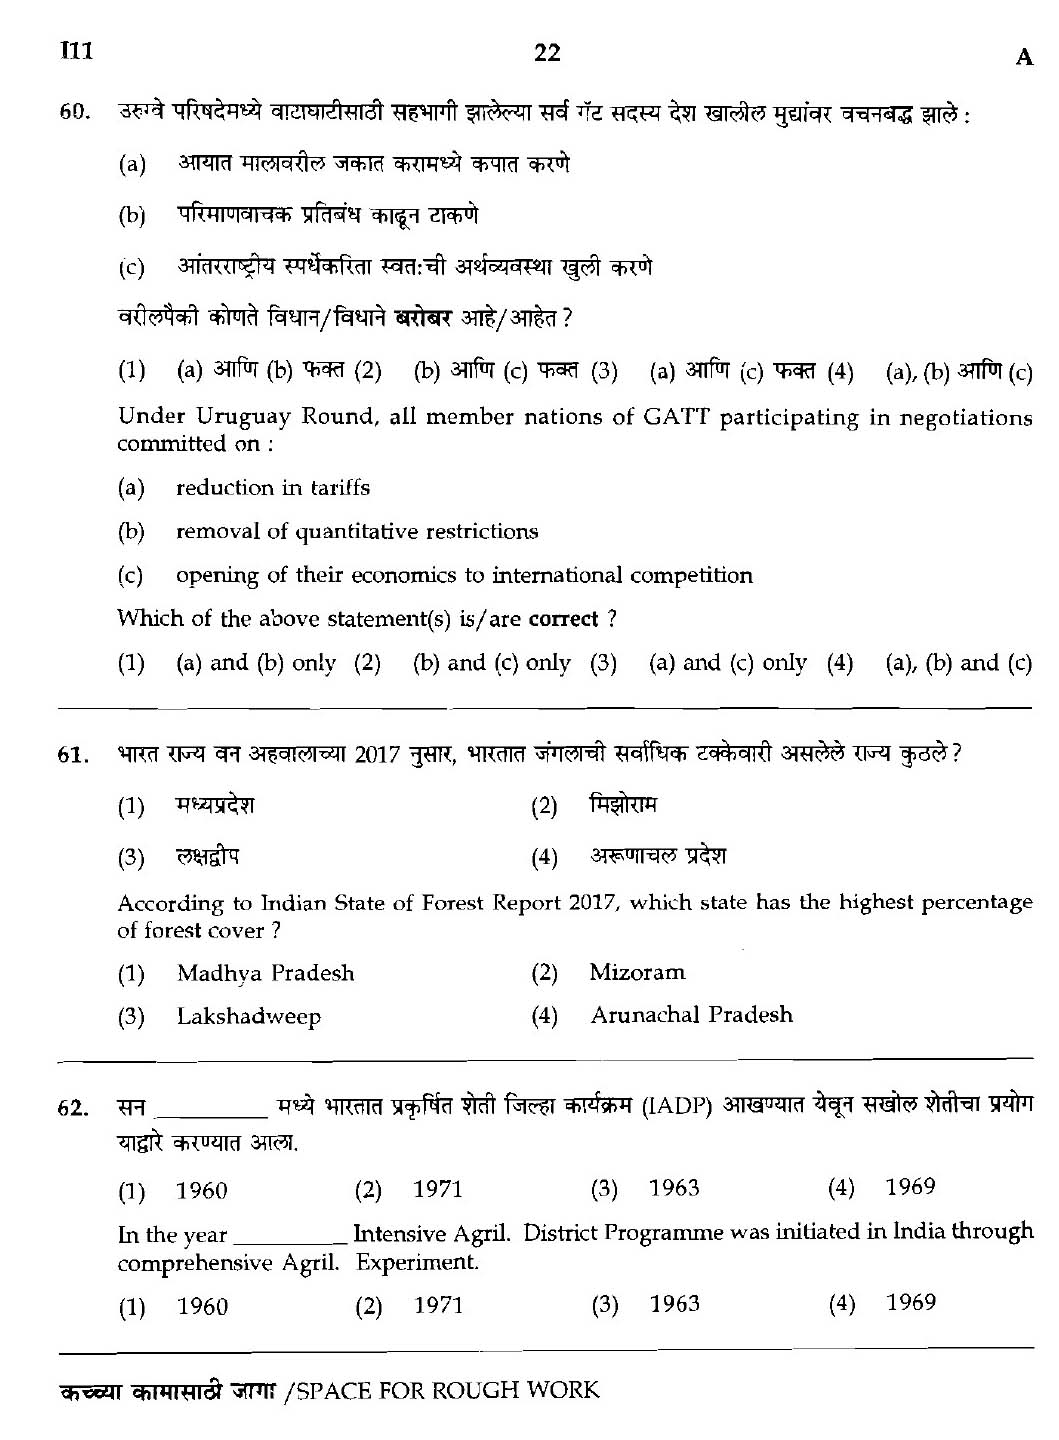 MPSC Agricultural Services Preliminary Exam 2018 Question Paper 21